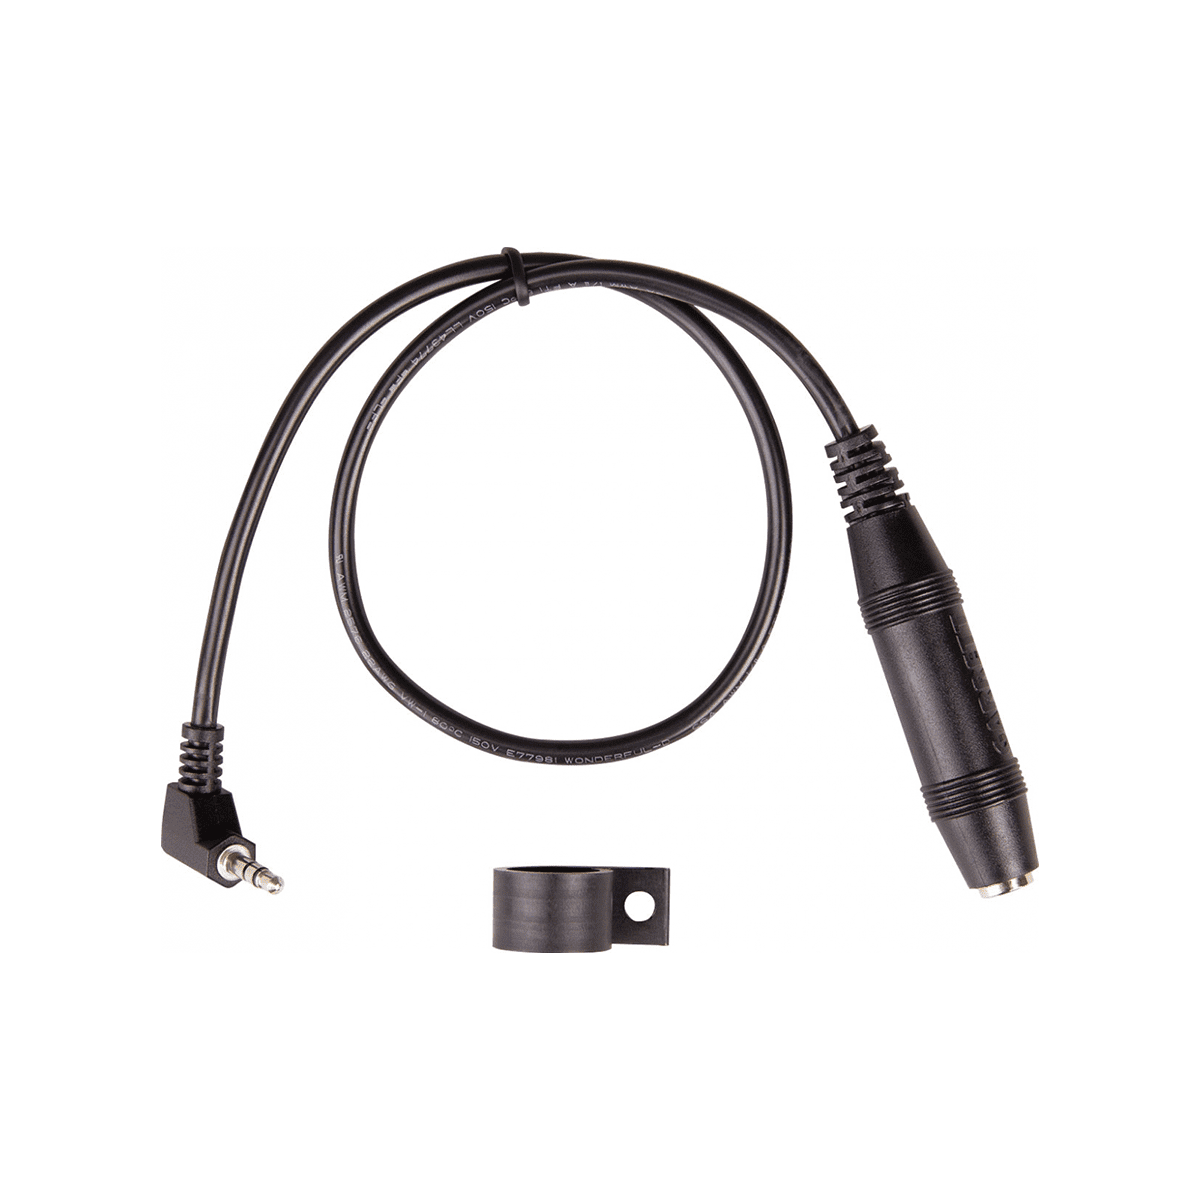 1/4" to 1/8" Headphone connection adapter